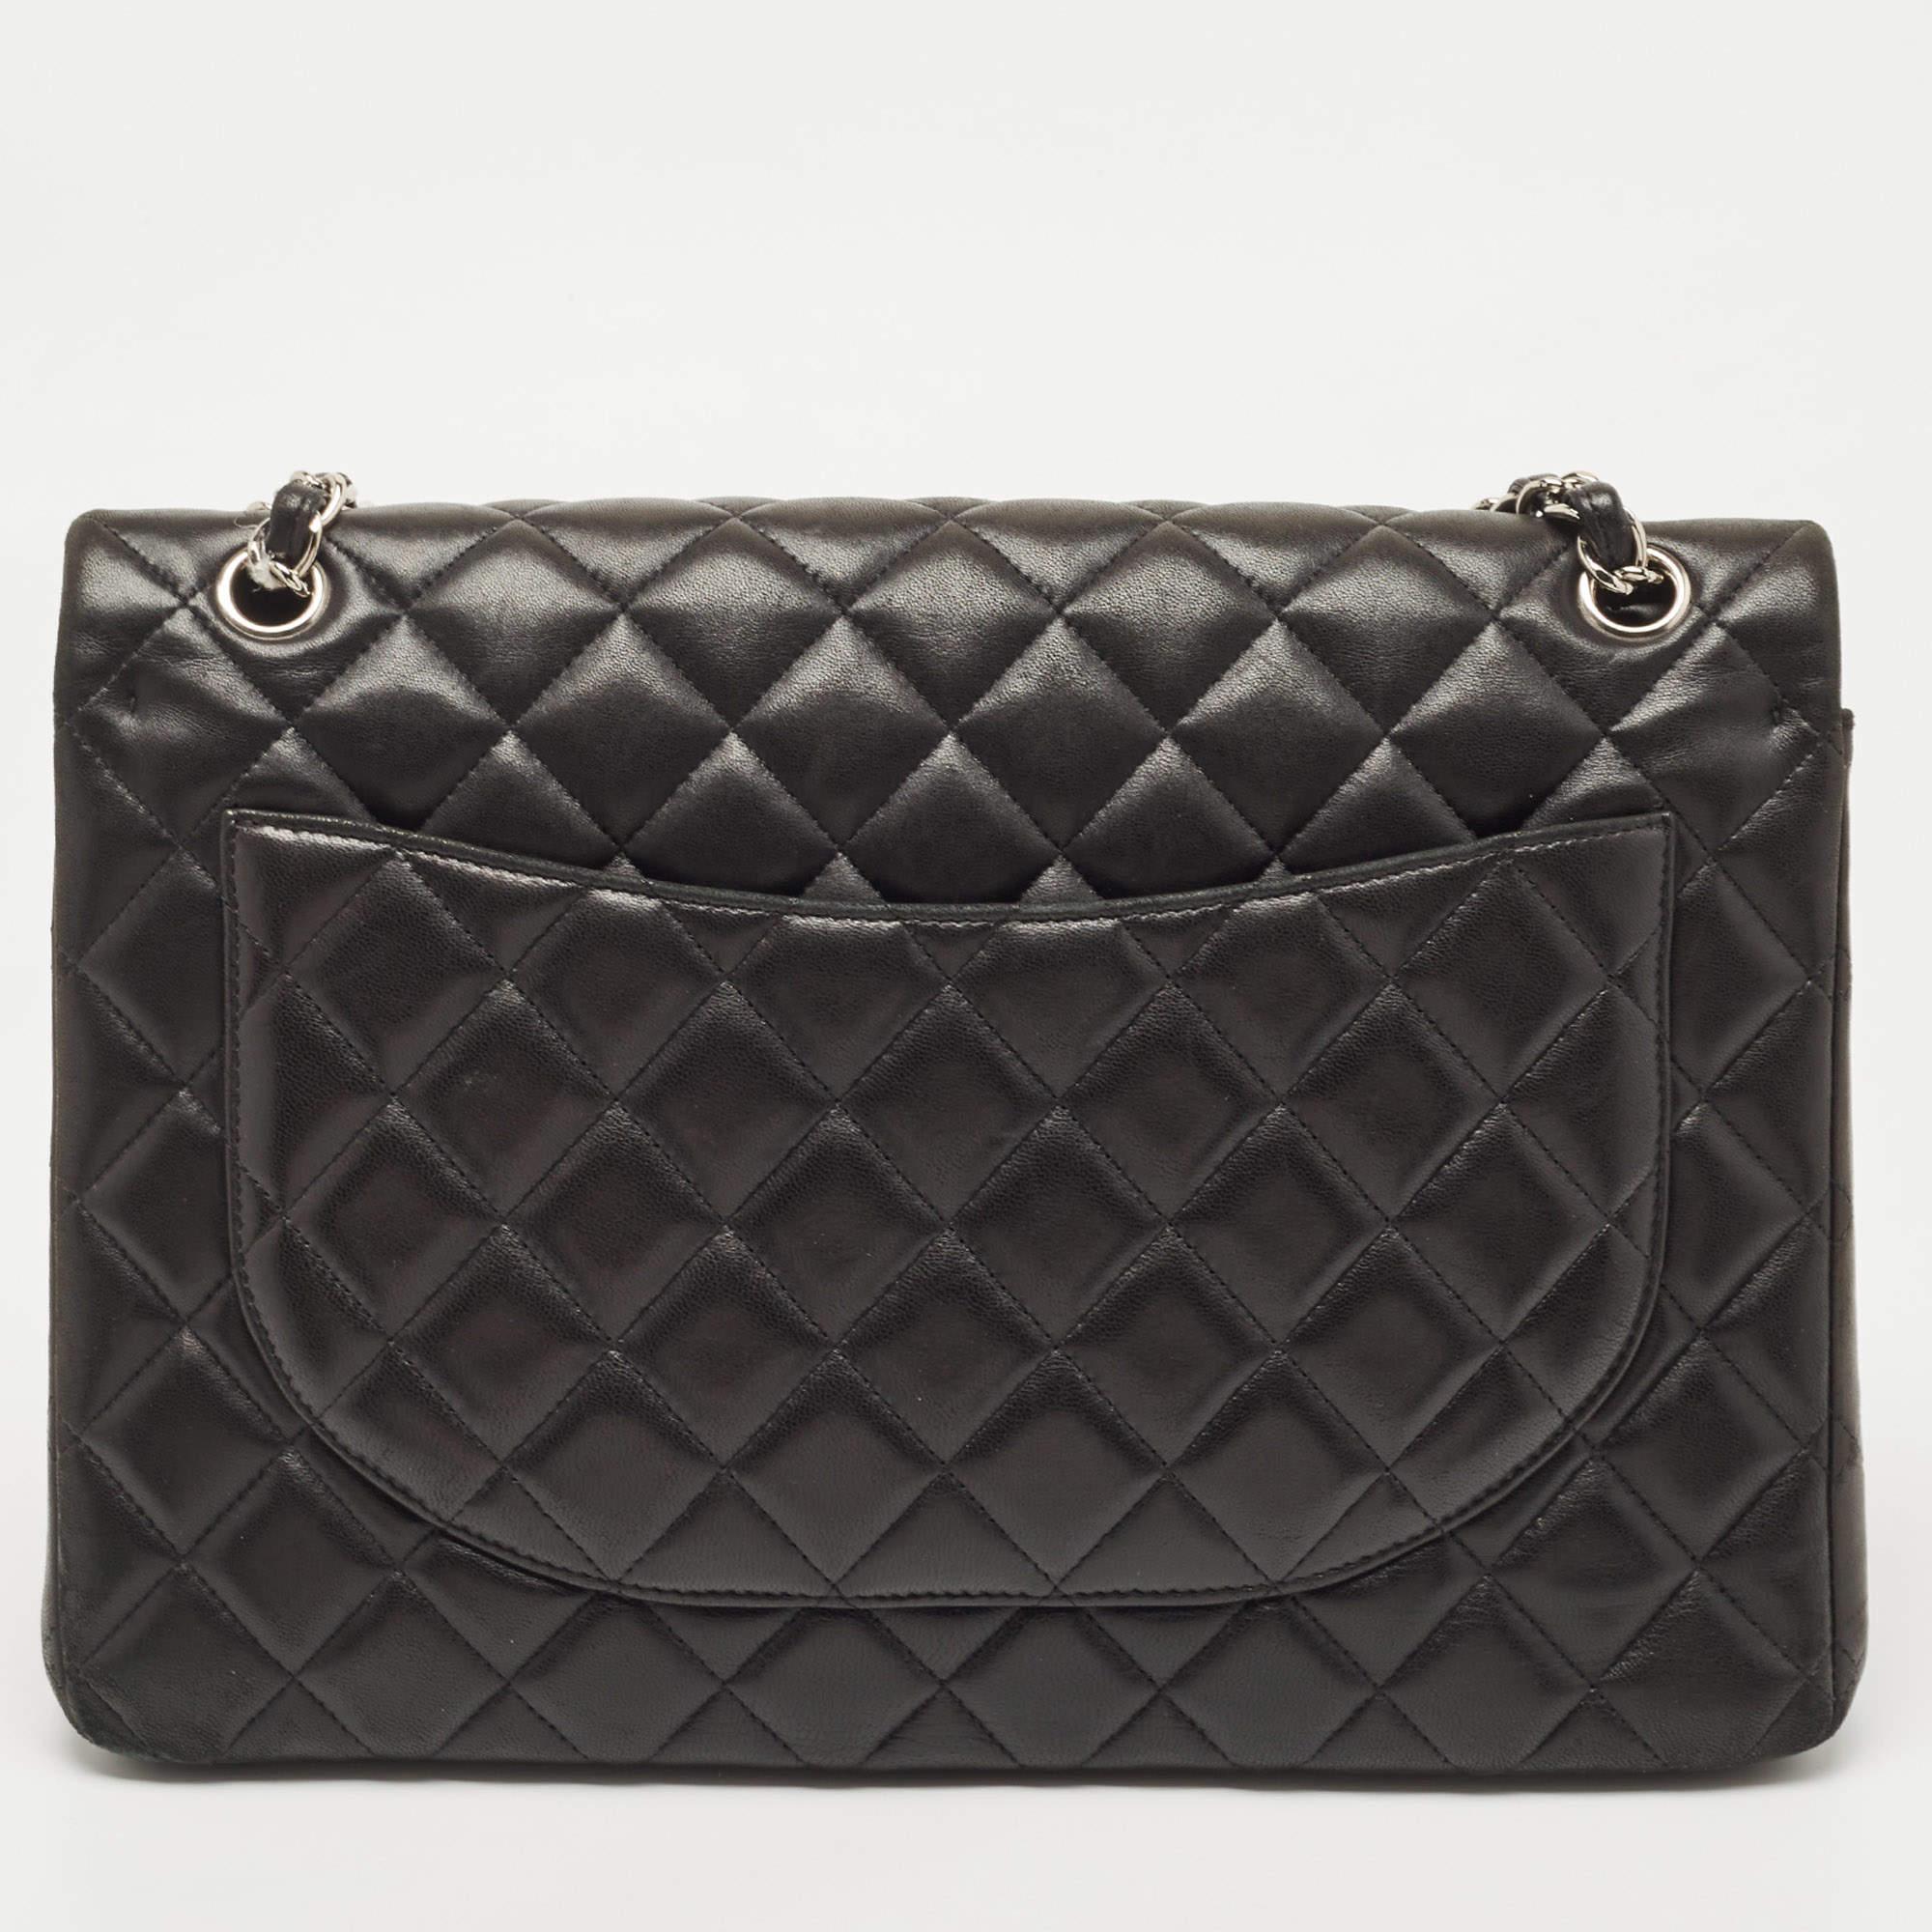 Chanel's luxurious Classic Flap bag is a must-have in a well-curated wardrobe! This stunning bag has a masterfully-crafted leather exterior with silver-tone hardware and the iconic CC logo on the front. This Maxi Classic Double Flap is complete with